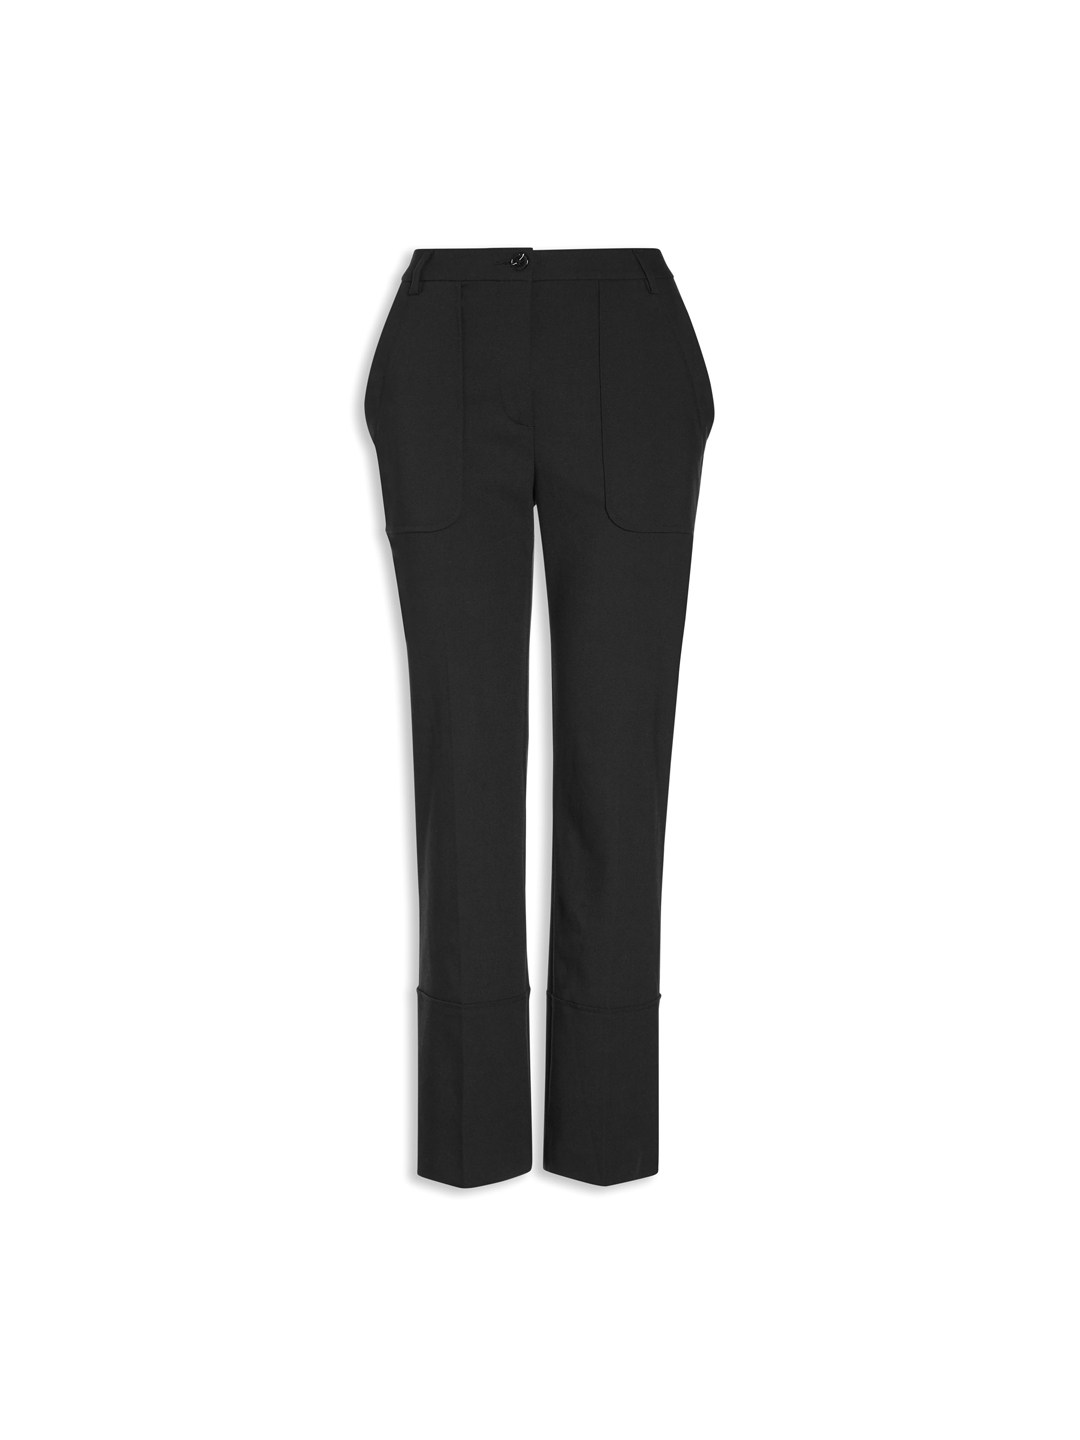 Womens Black Trousers  Black Casual  Work Trousers  Next